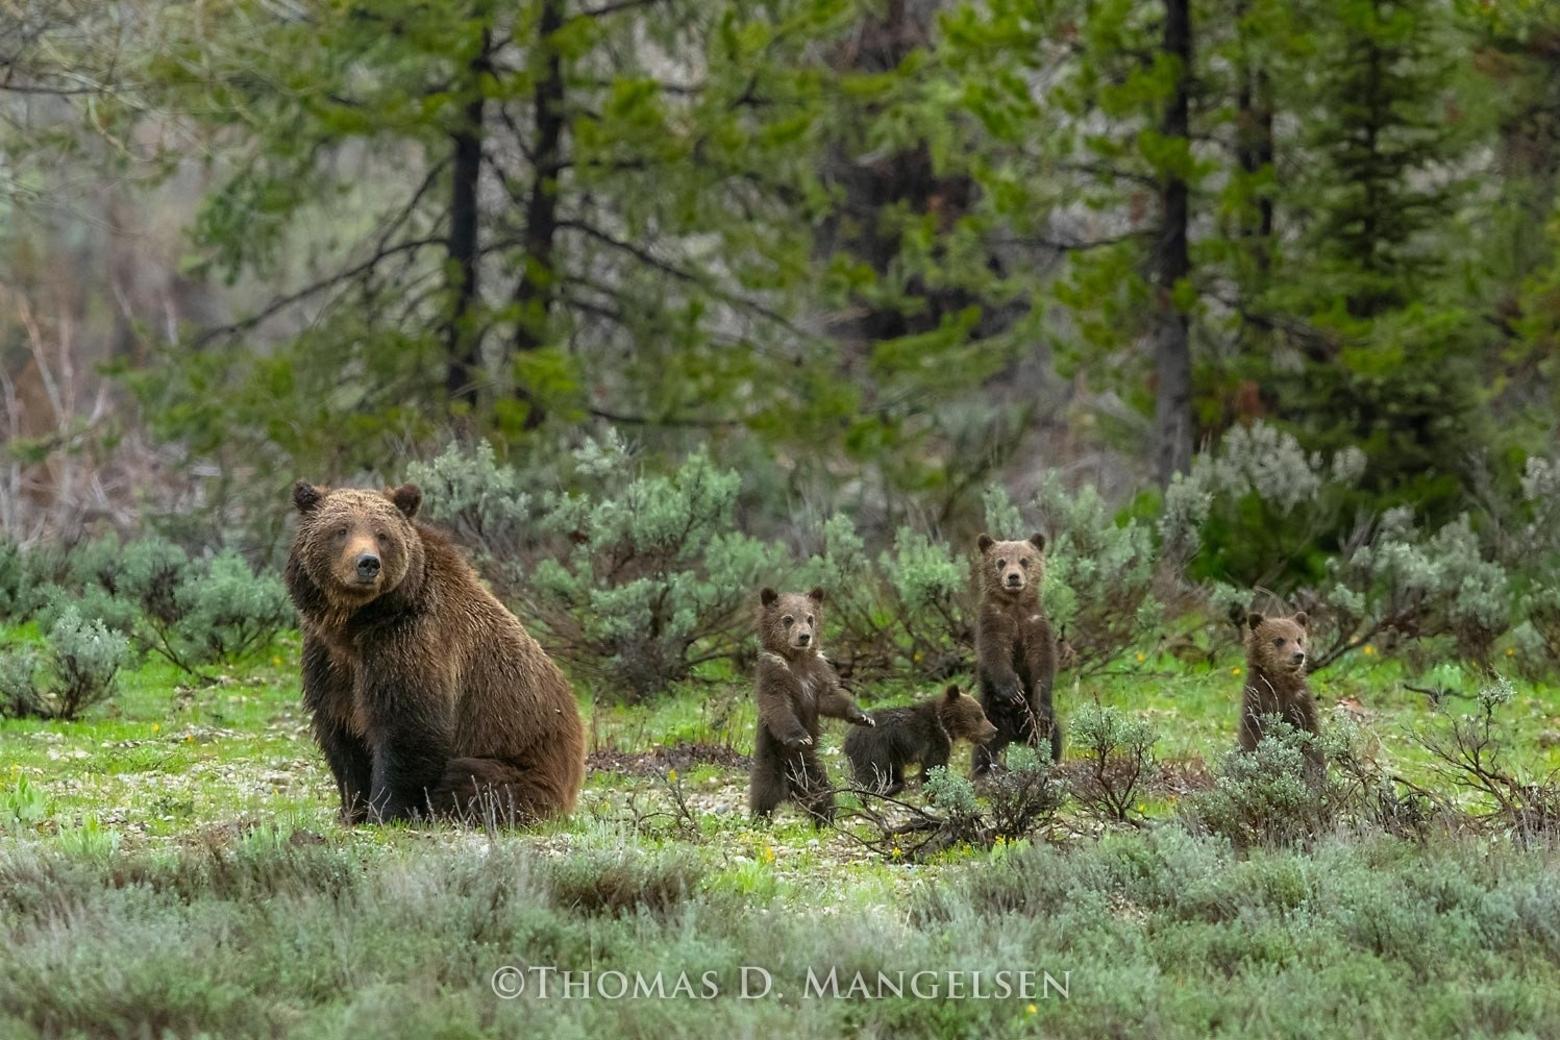 One topic sure to come up is that of famed Jackson Hole Grizzly 399 and her incredible legacy as a mother bear who has two dozen descendants in her bloodline. If she emerges from the den this spring, she will be 27 years old.  "Among the Sage—399 and Quadruplets" is a photograph by Thomas D. Mangelsen, used with permission. To see more Mangelsen's amazing images of bears and other species, go to mangelsen.com